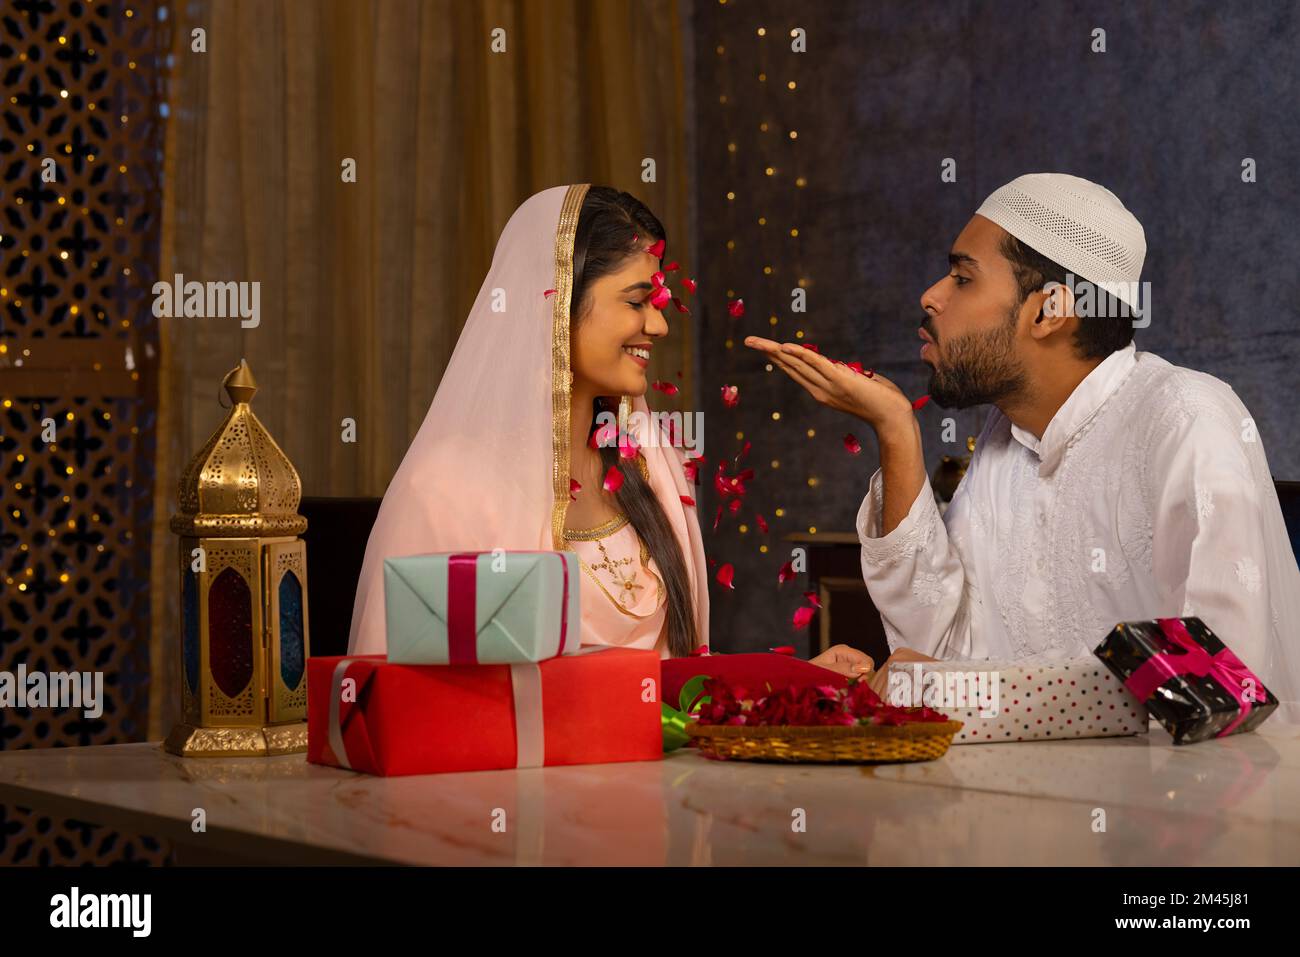 Muslim man blowing rose petals over his wife at home Stock Photo